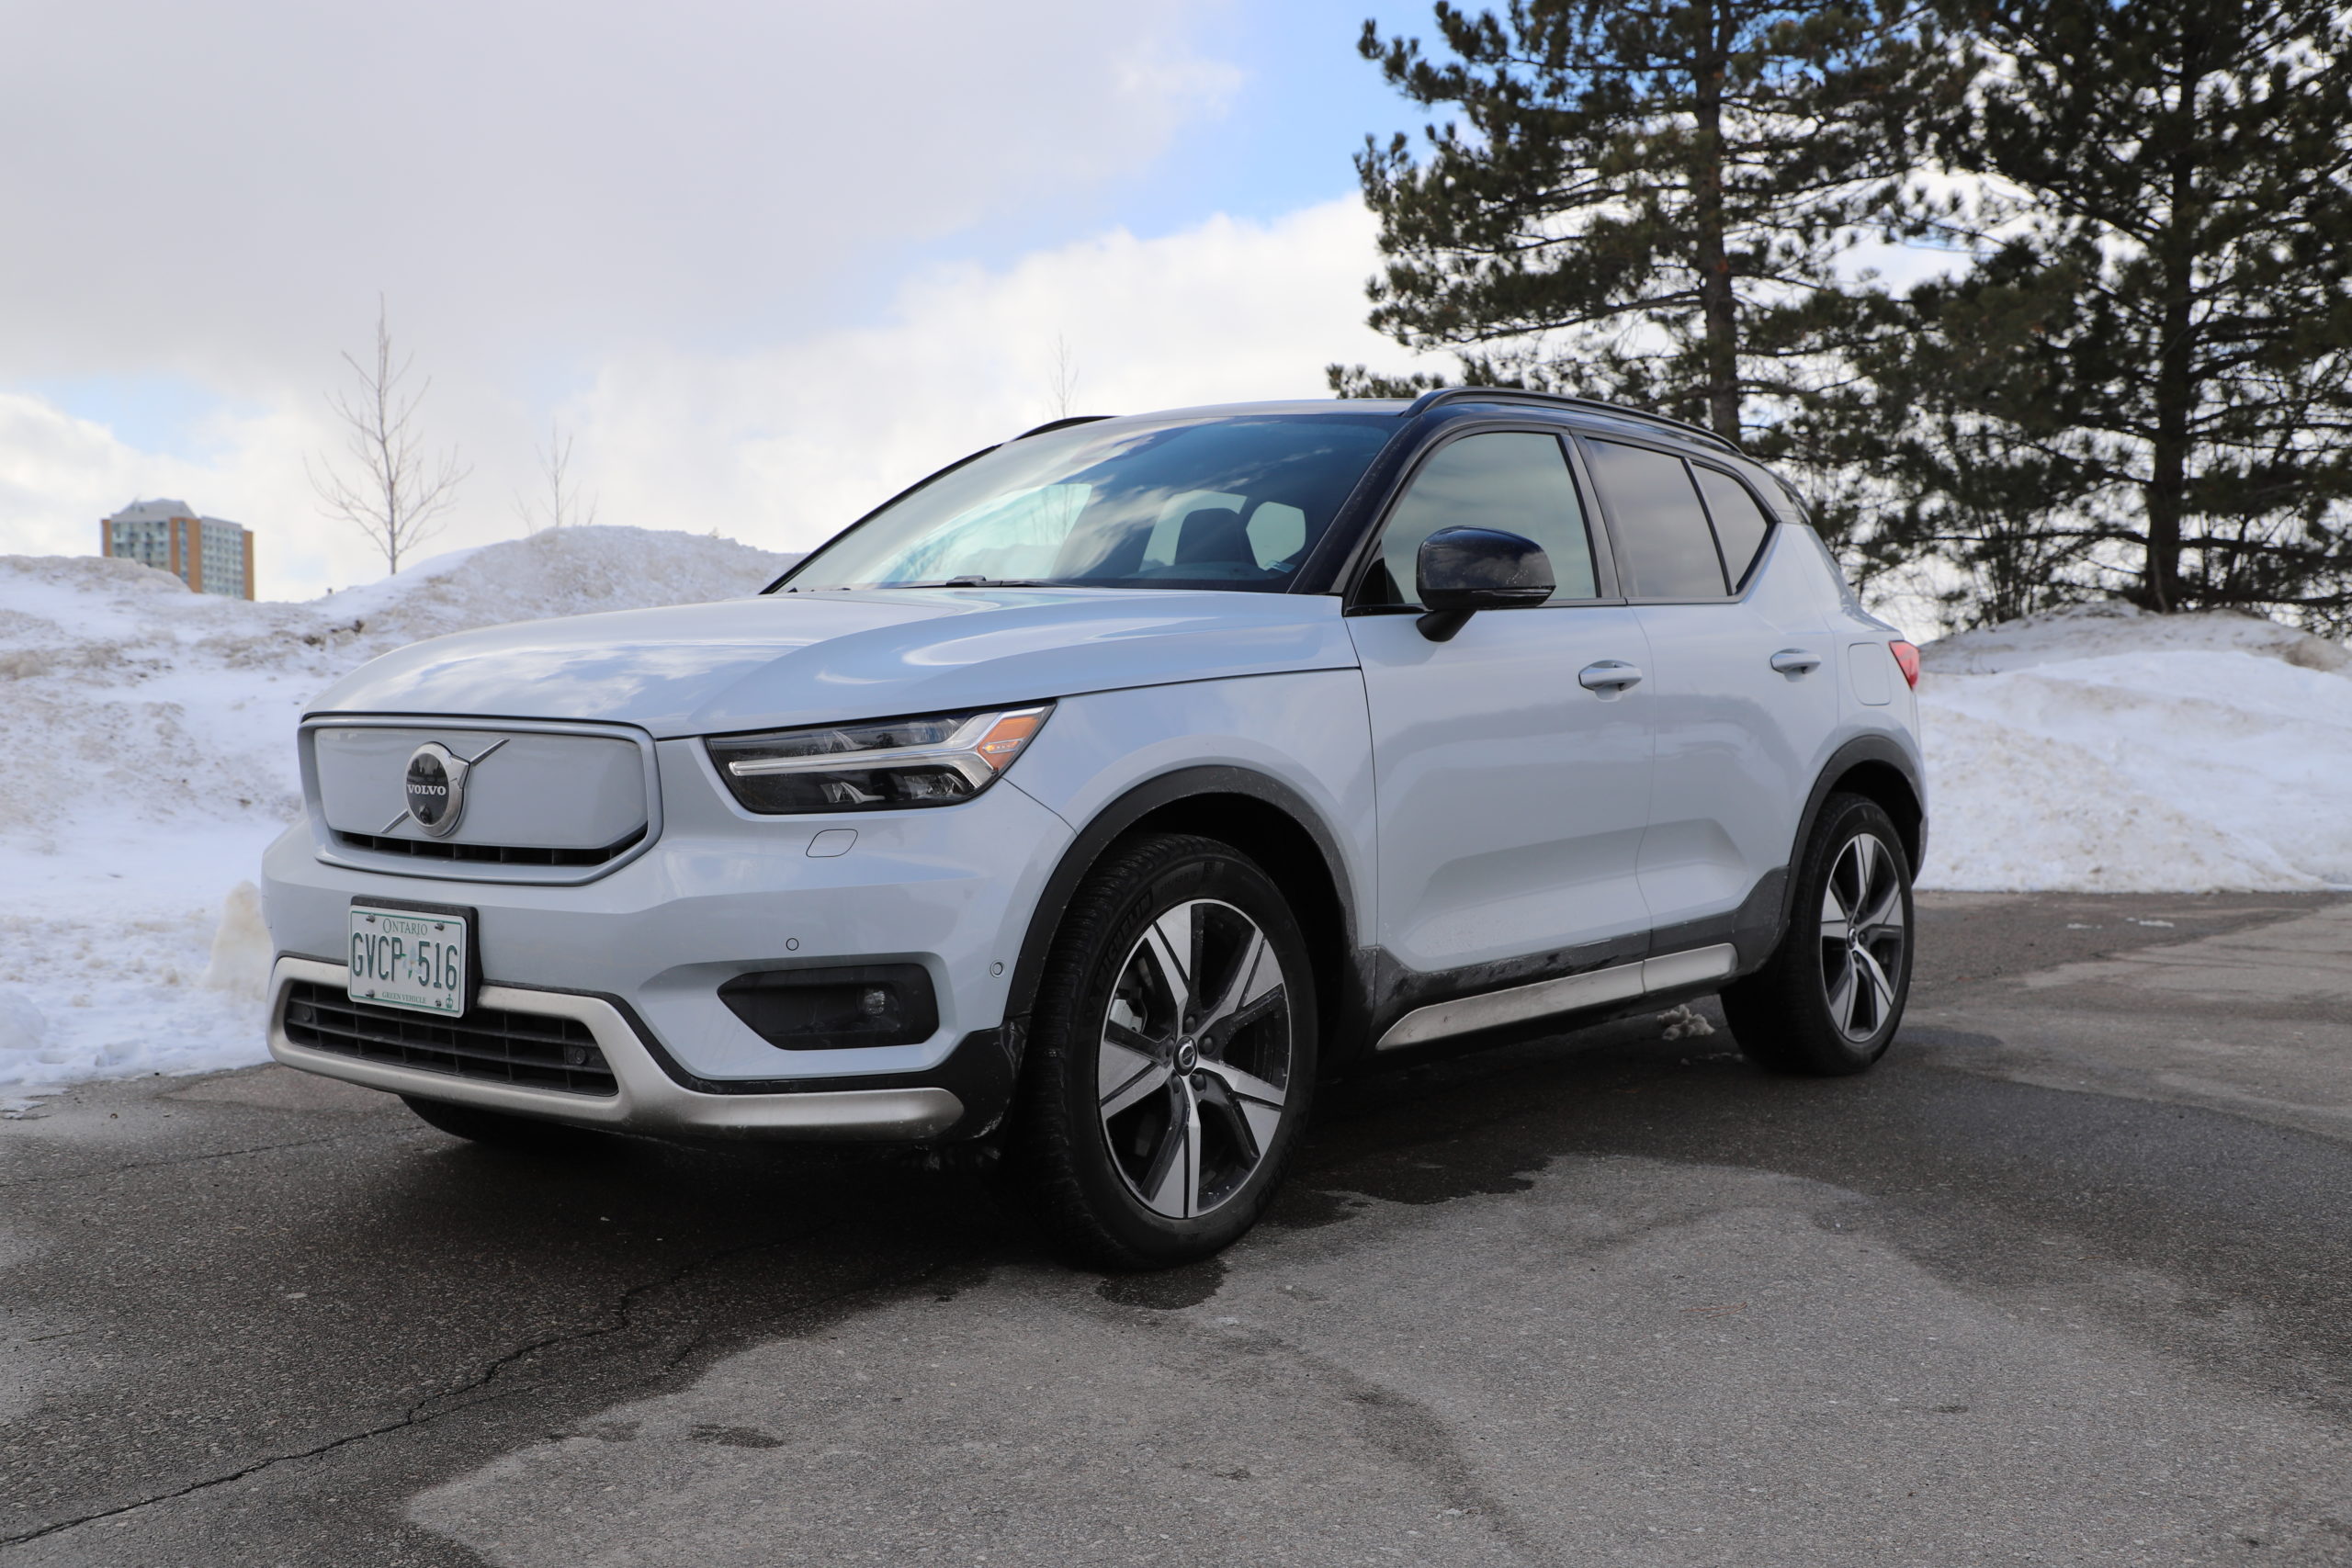 2022 Volvo XC40 Recharge / Jay Kana, The Charge